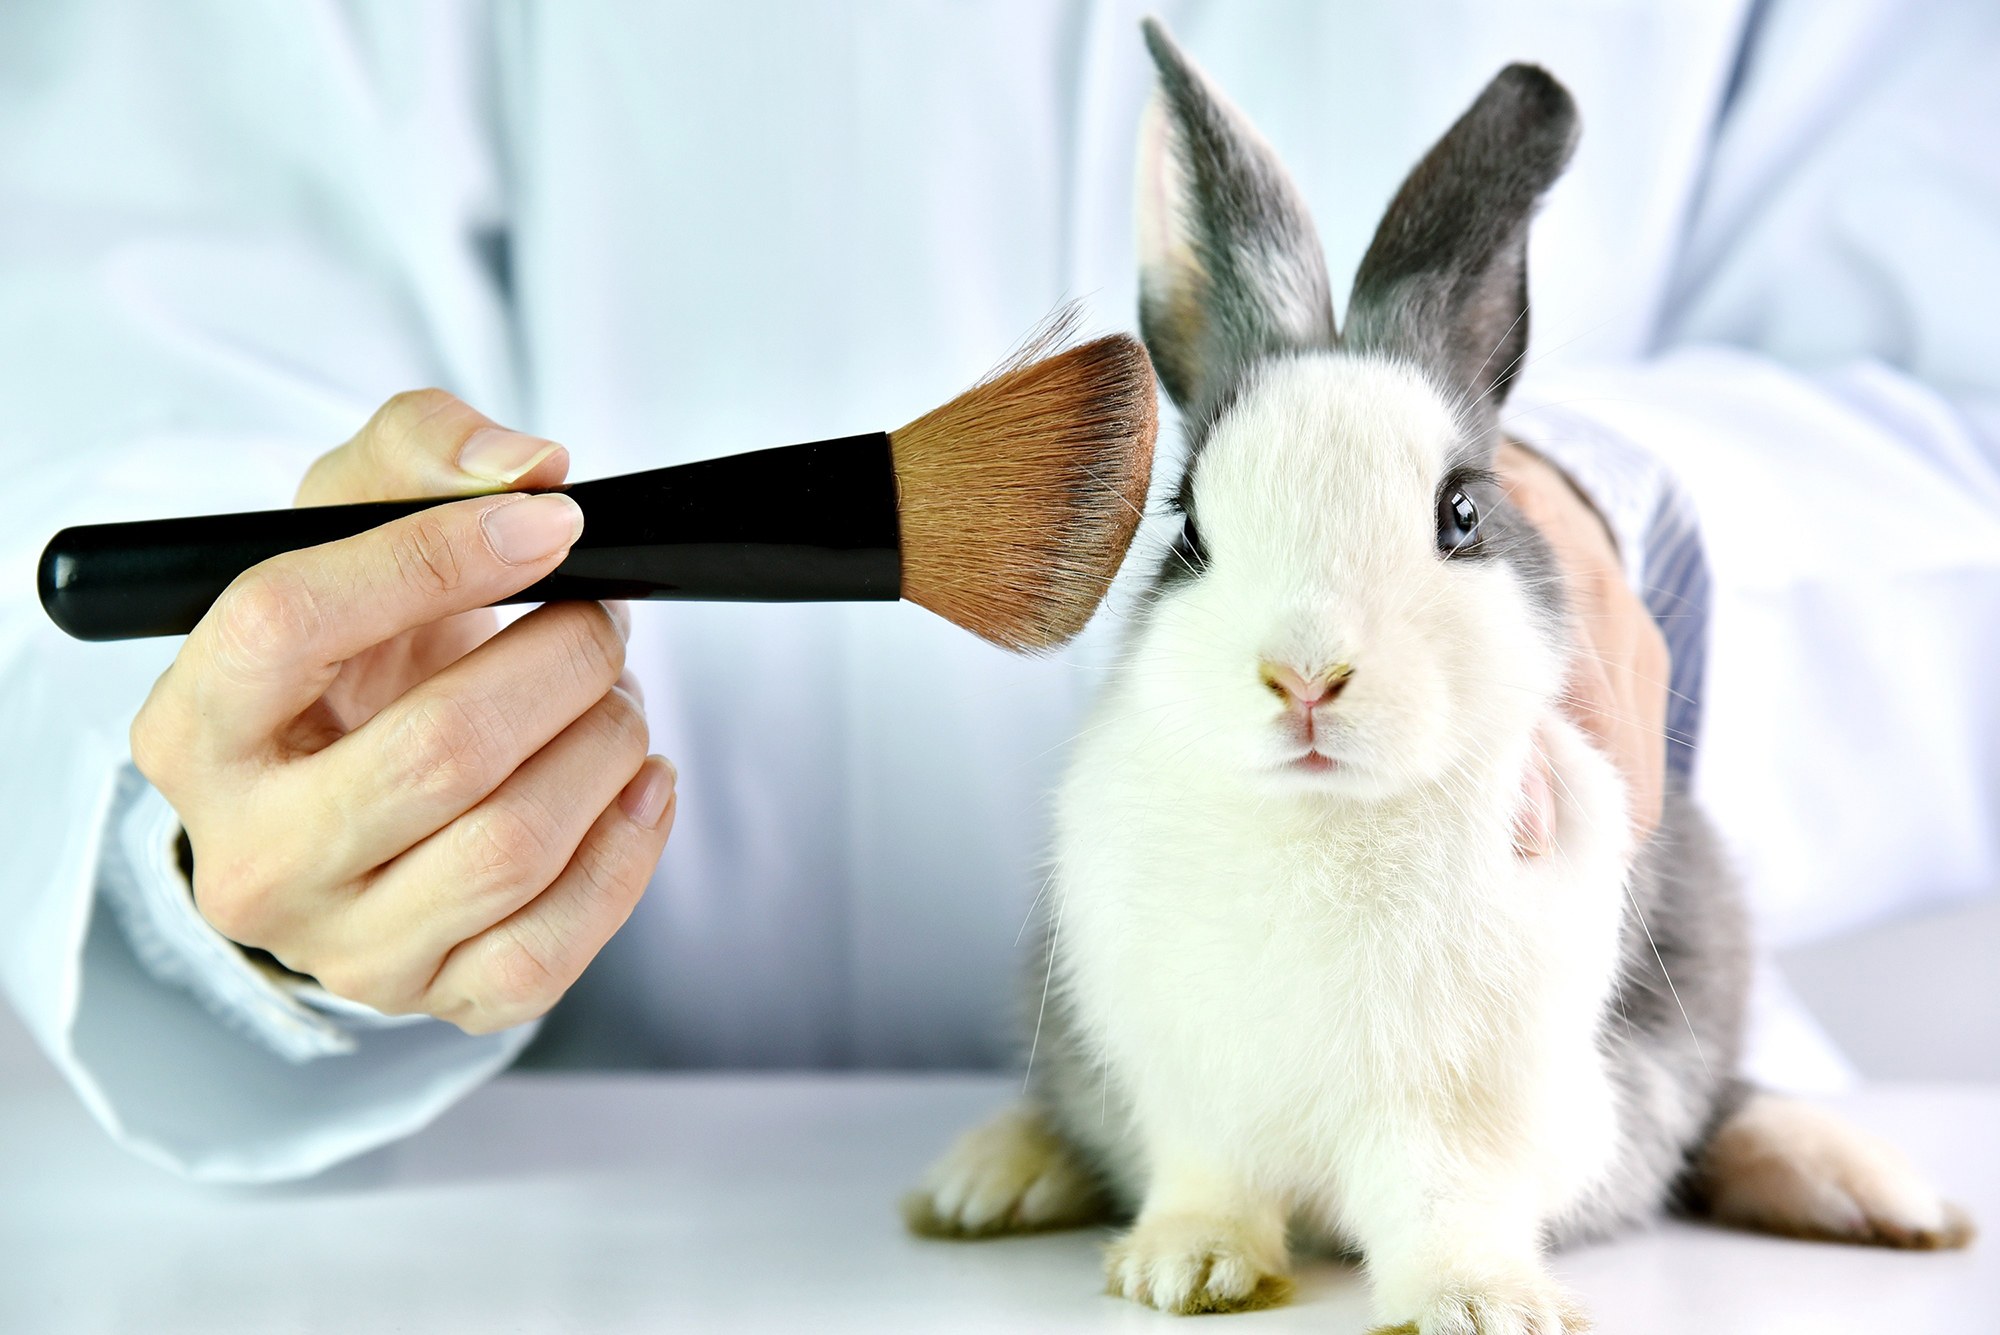 cruelty-free-beauty-products